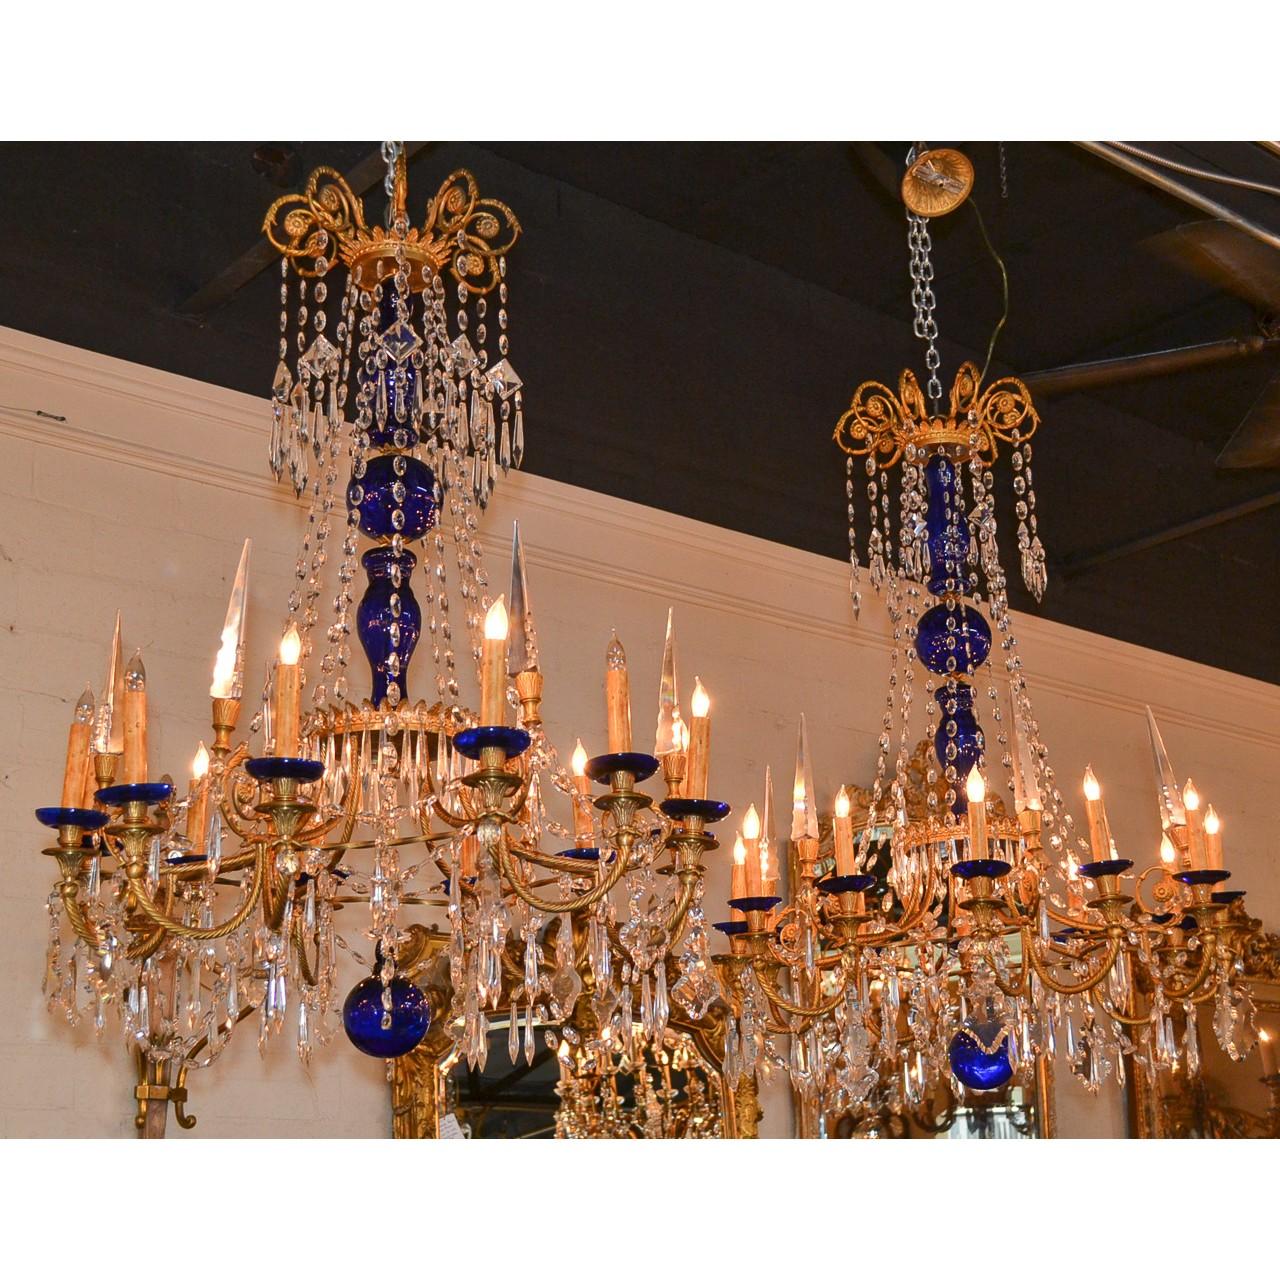 Late 19th Century 19th Century Pair of Russian Bronze, Crystal, and Cobalt Chandeliers